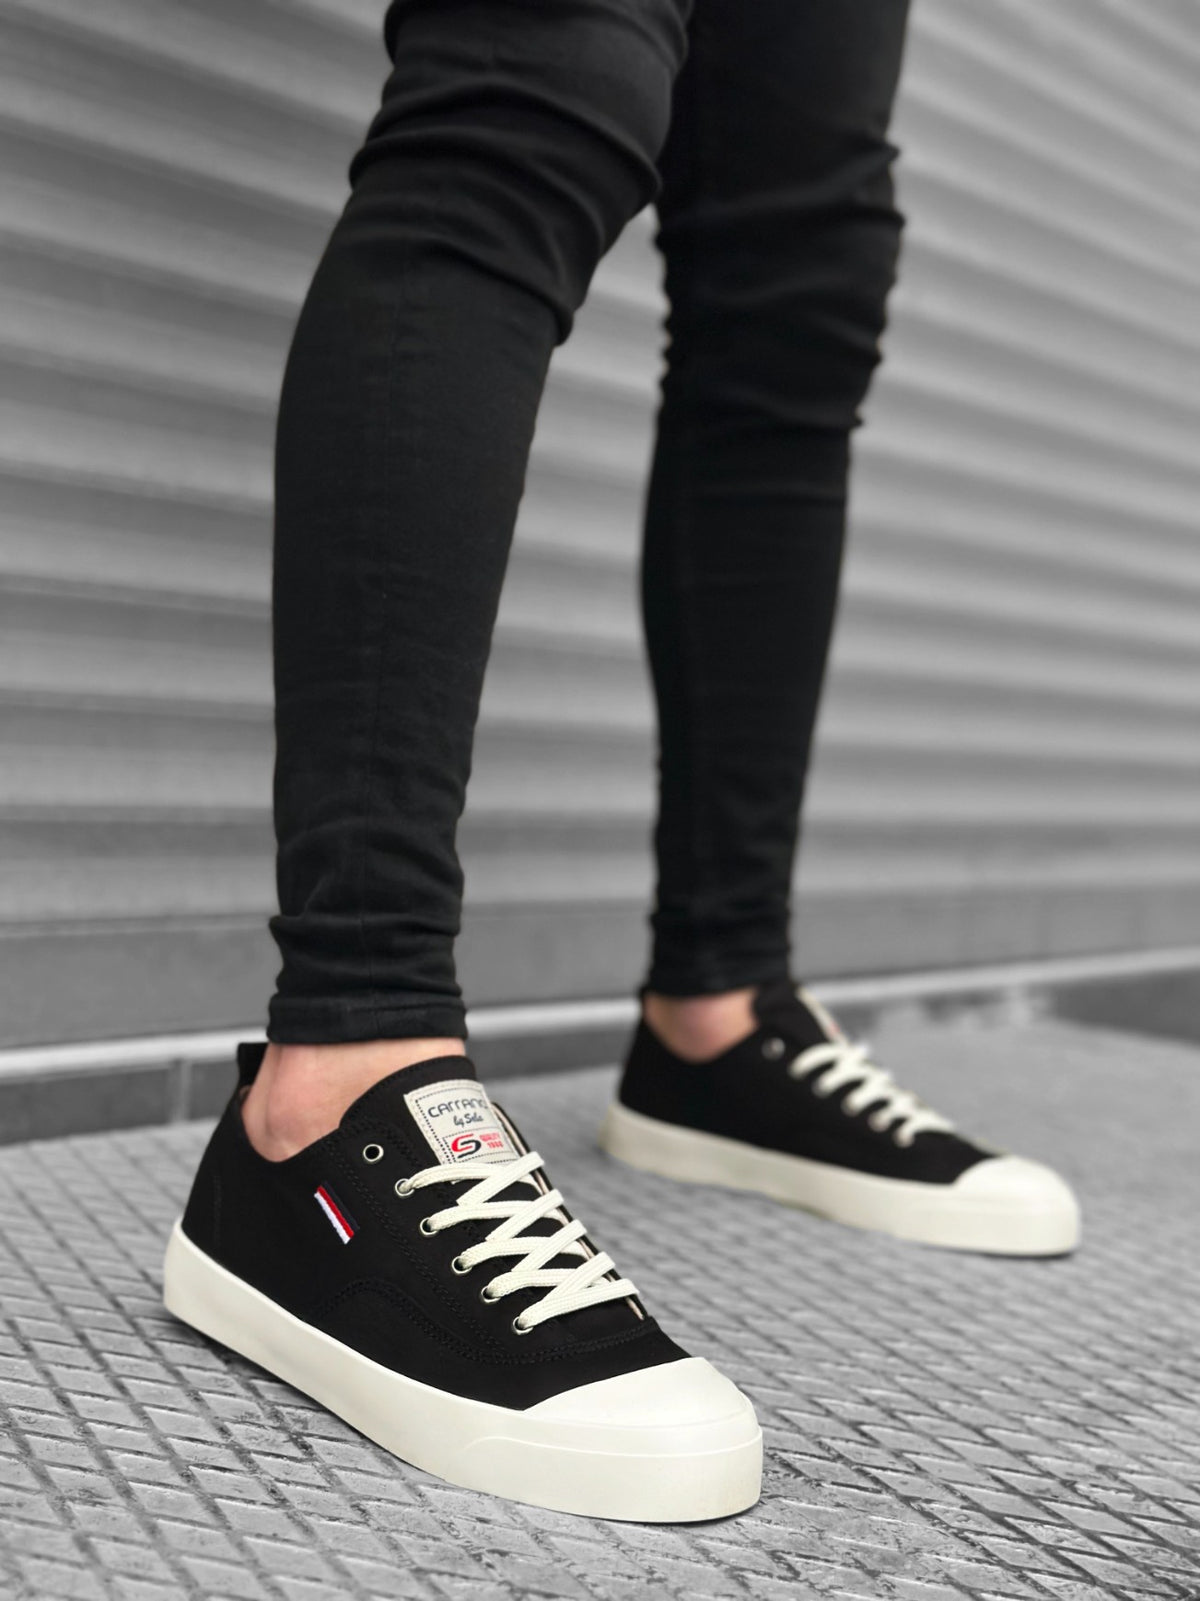 BA0223 Comfortable Flat Sole Linen Lace-up Black Casual Men's Sneakers Shoes - STREETMODE™